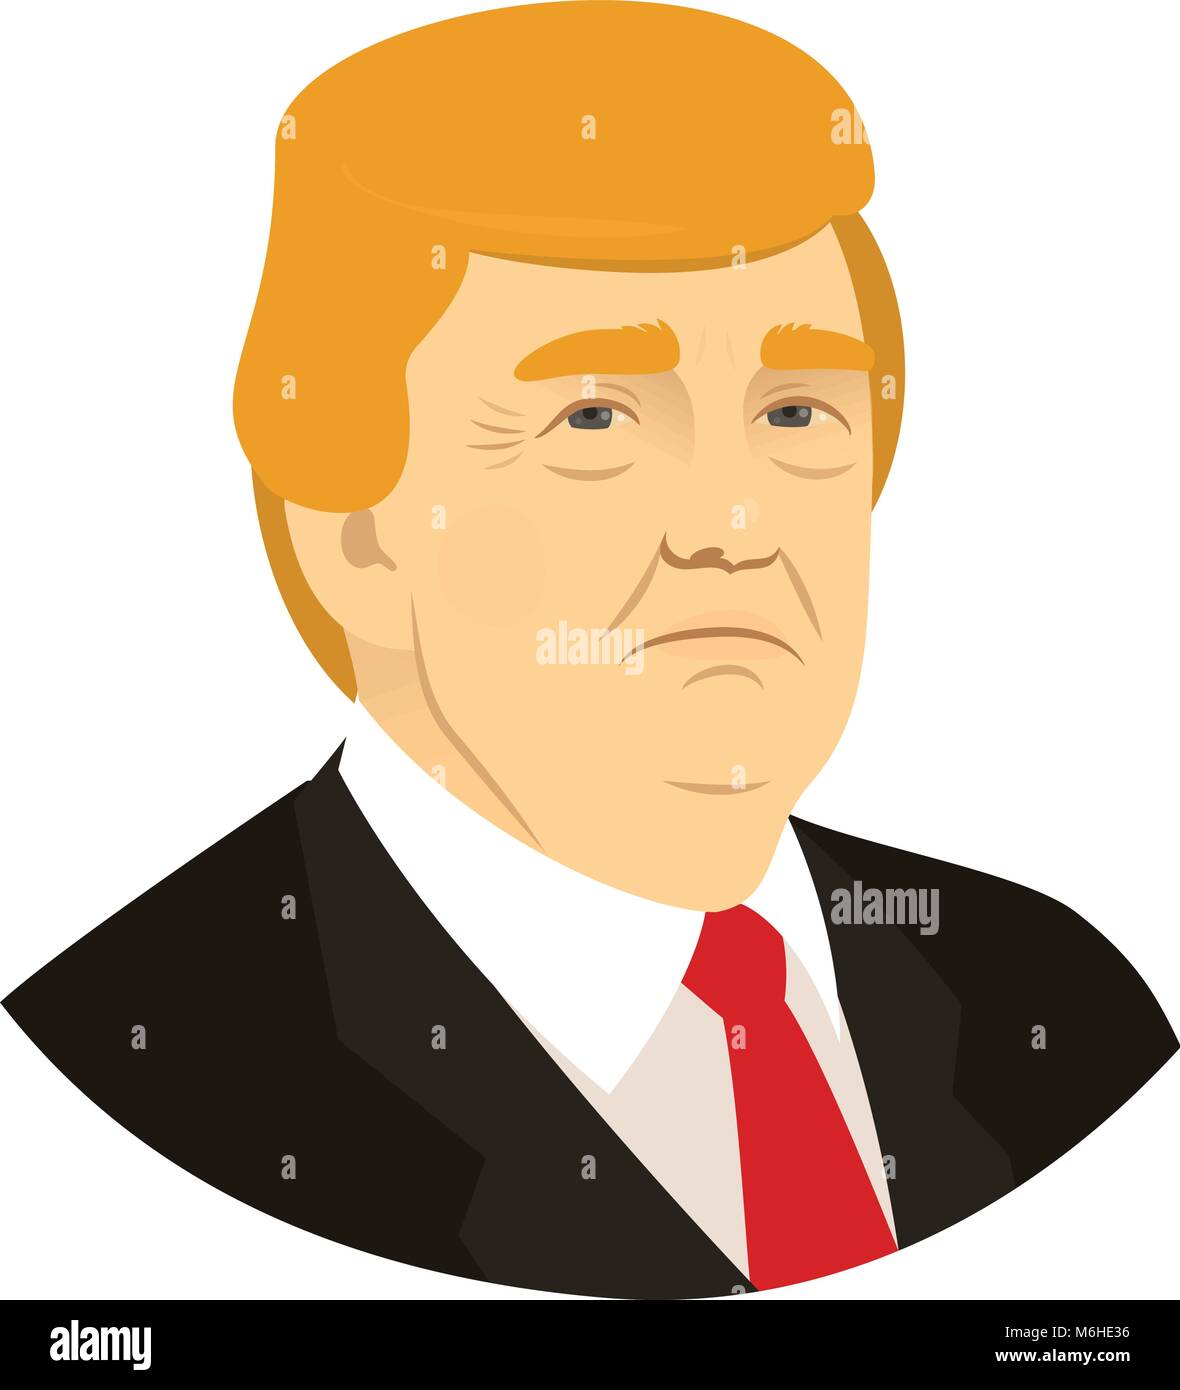 Donald Trump portrait, president of the USA, March 18, 2018. Stock Vector